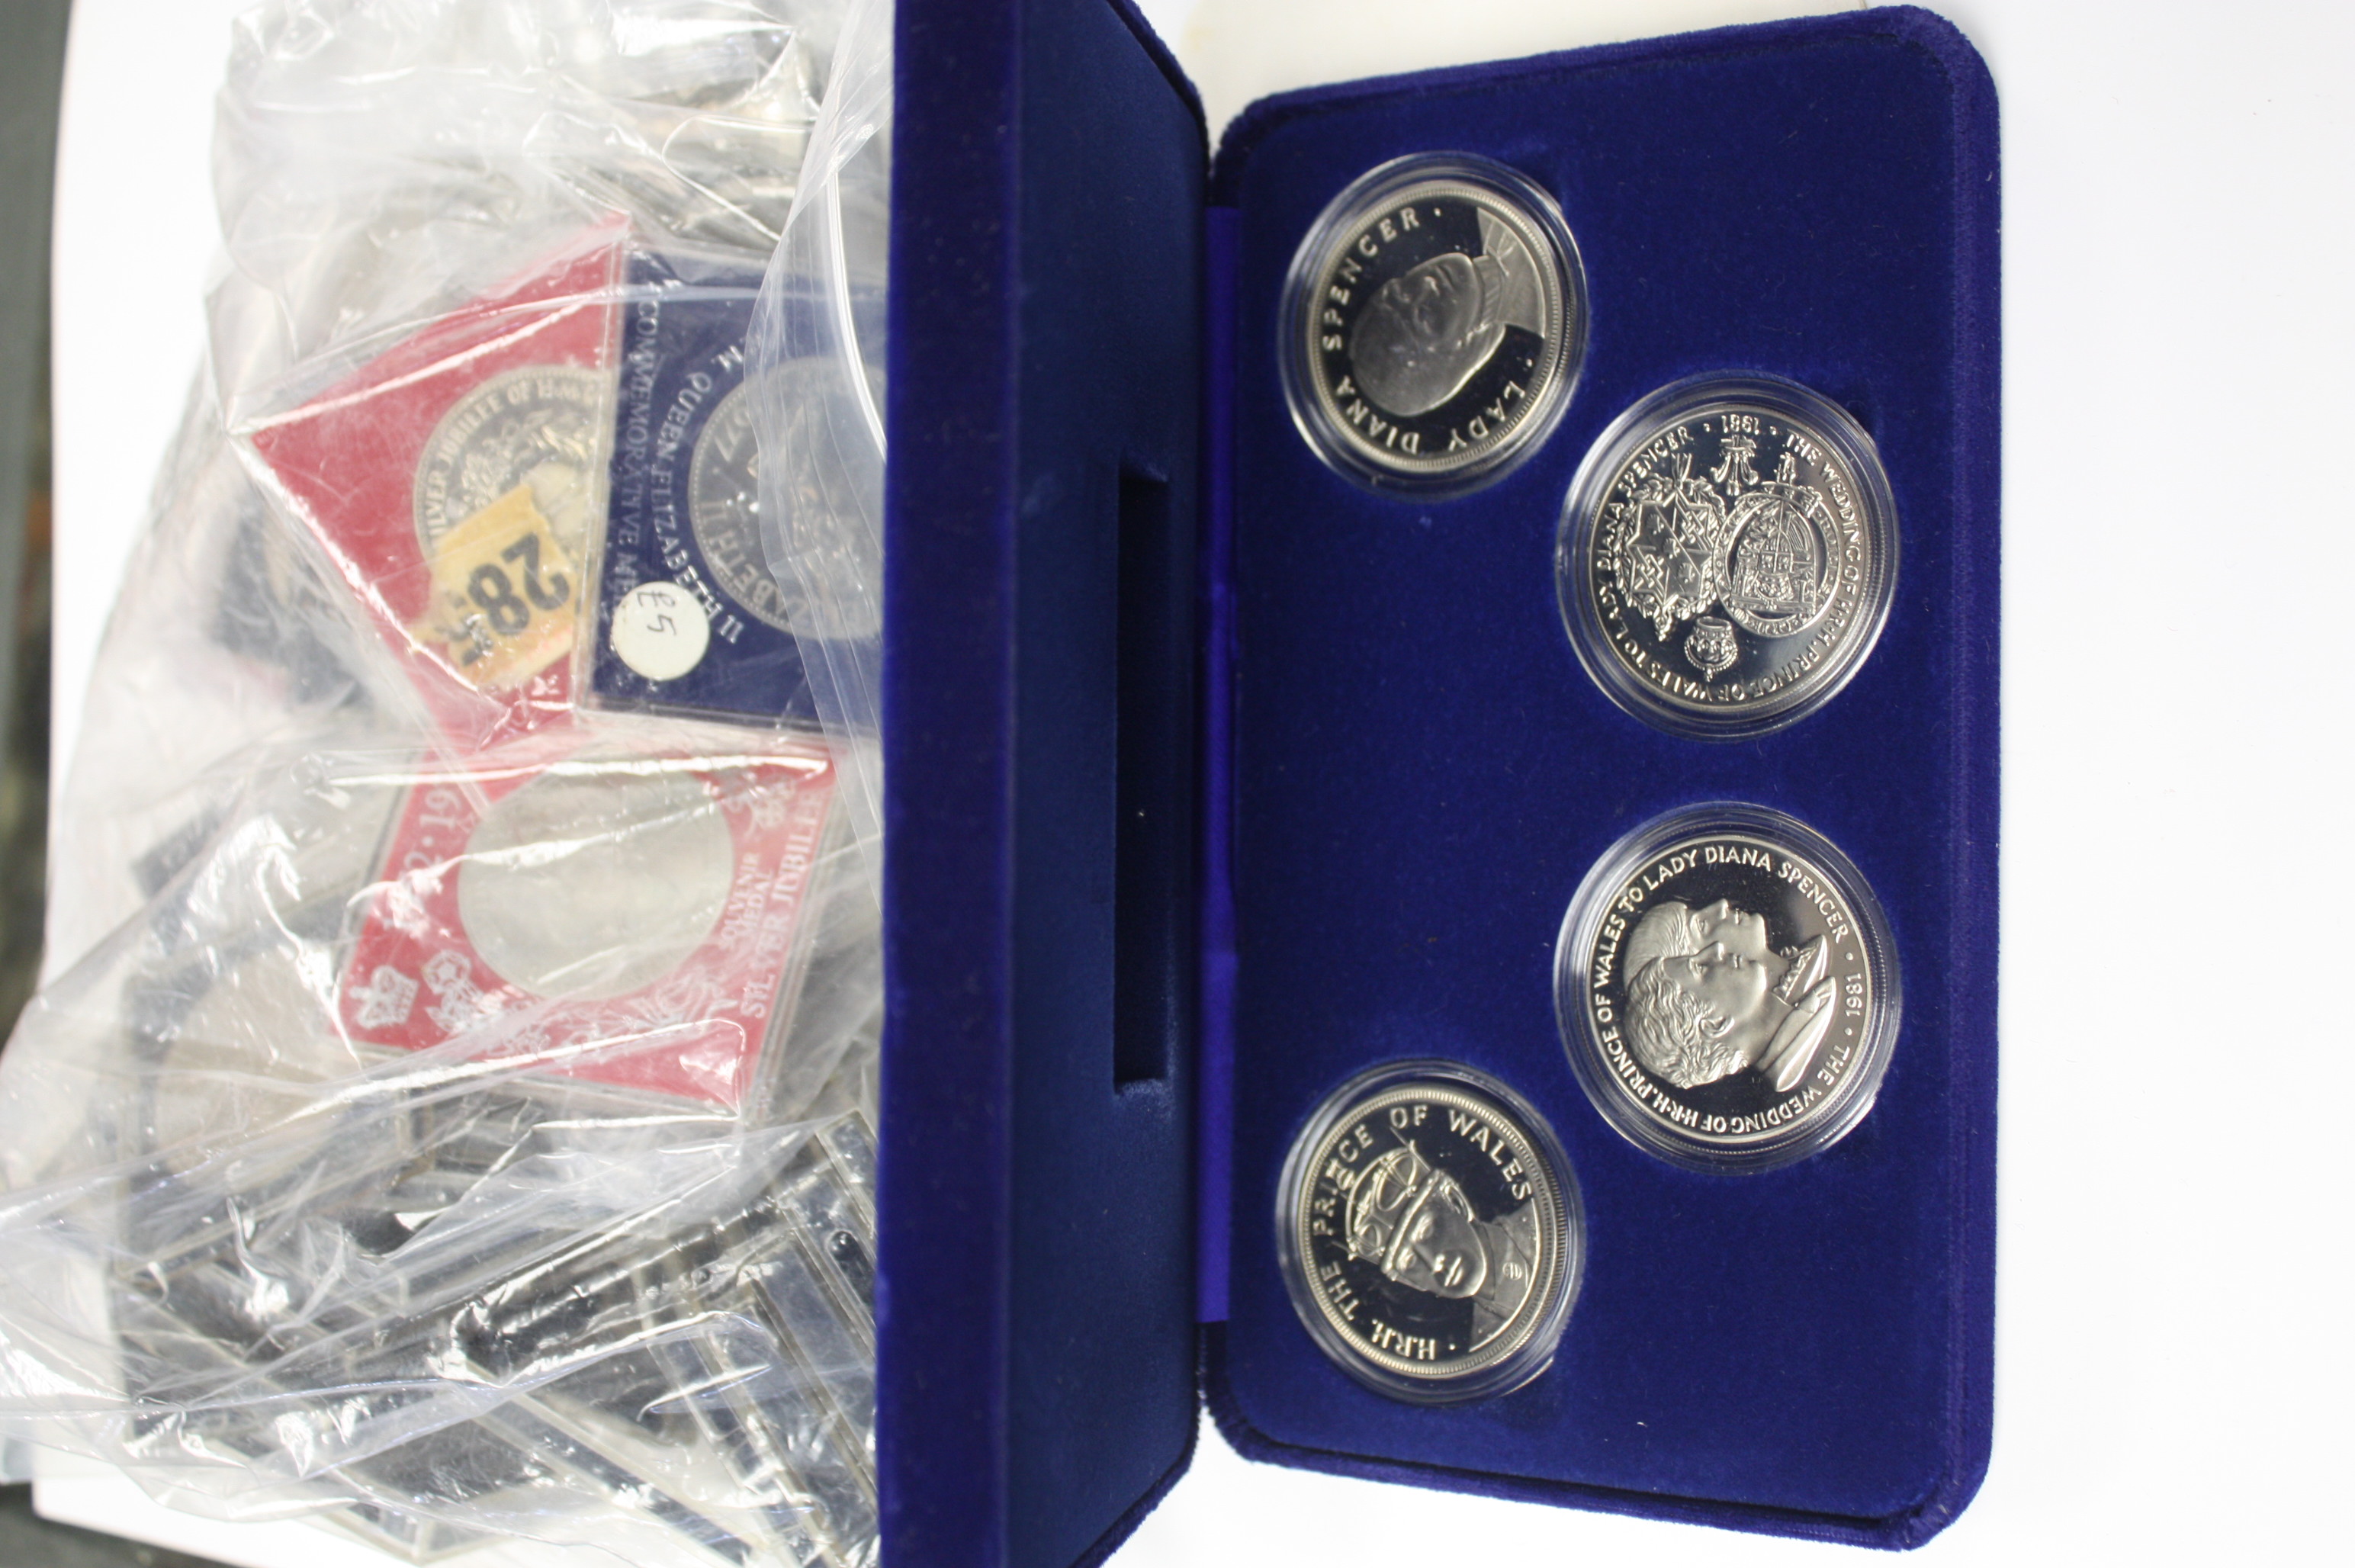 More than 75 Five Shilling coins, 1953 and 1960, along with 6 souvenir medals 1977 and also boxed